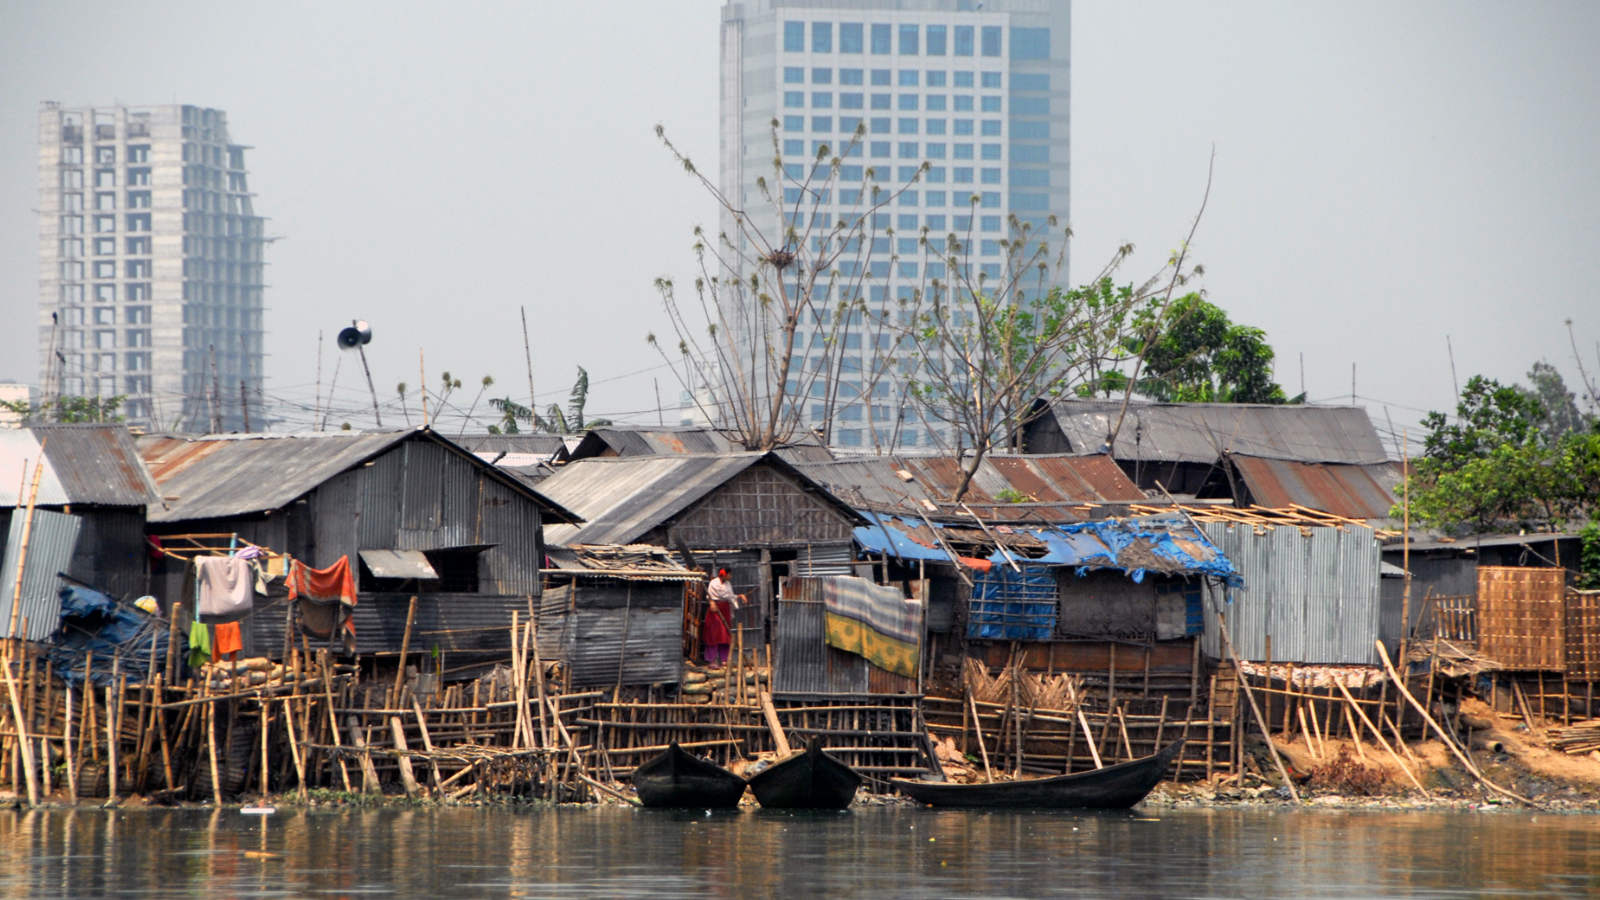 high-rise buildings and informal settlements in Dhaka